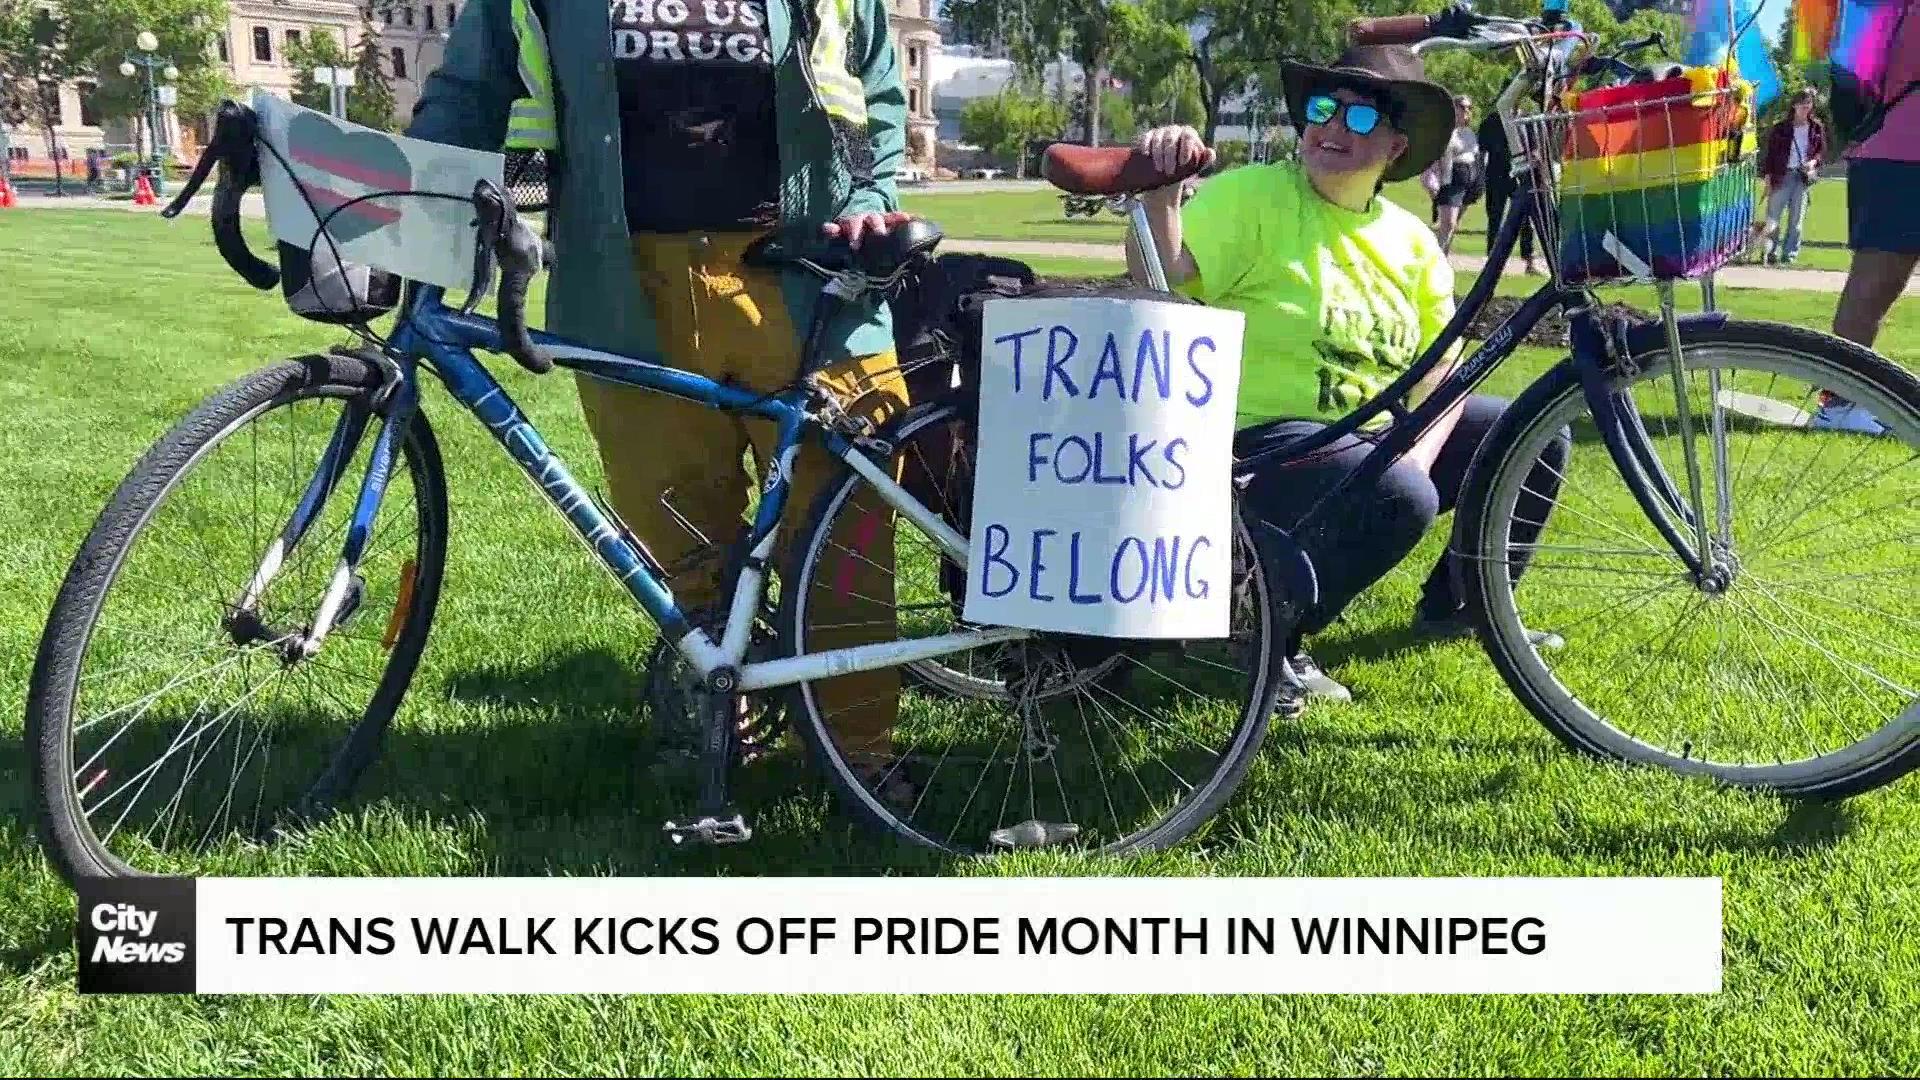 The streets of Winnipeg turned blue, pink and white for a Trans Pride Rally and March